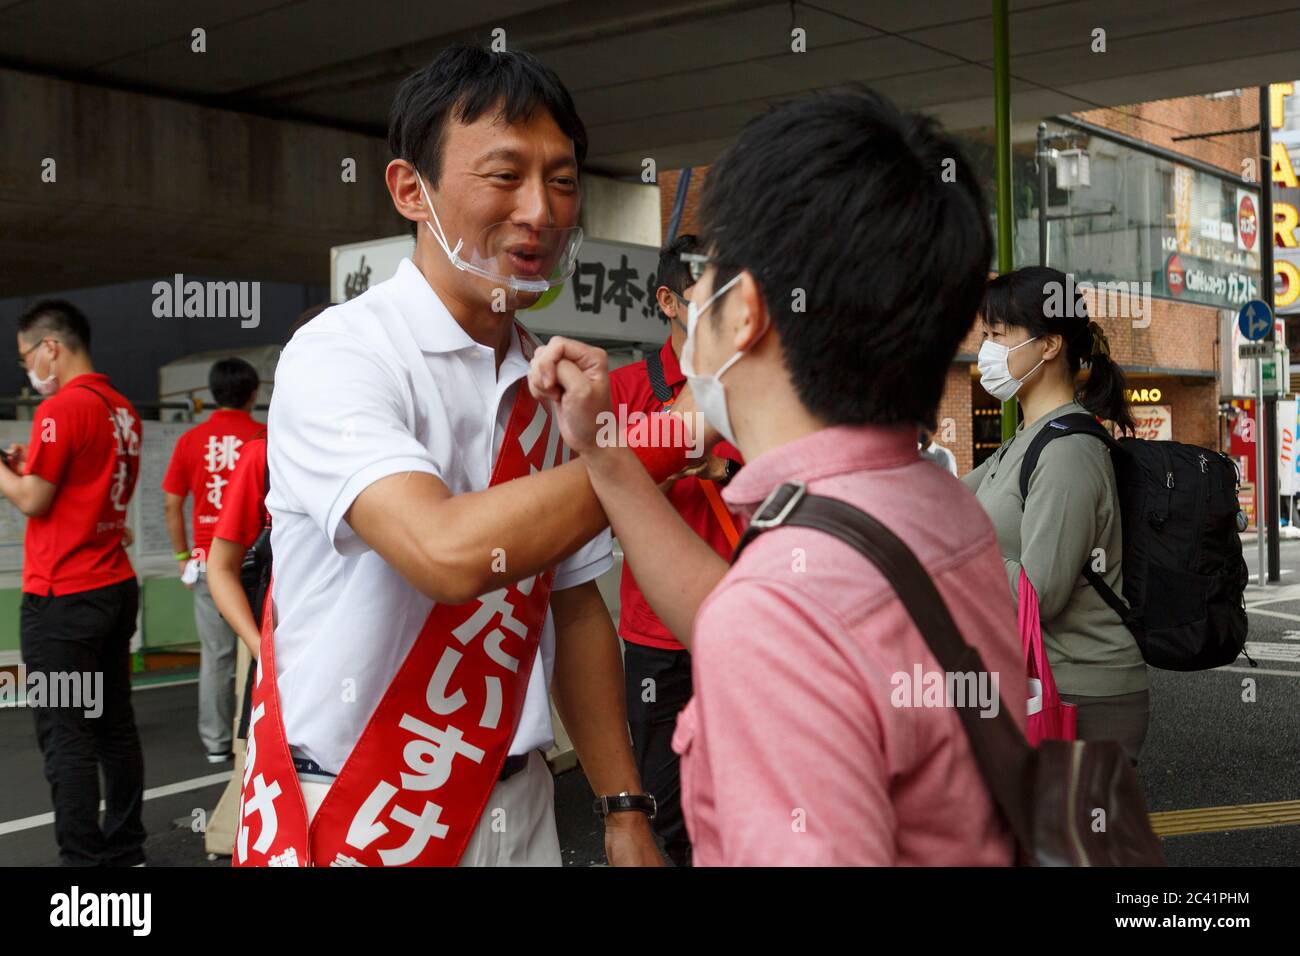 Tokyo, Japan. 23rd June, 2020. Candidate Taisuke Ono wearing a mouth shield greets voters with an elbow bump during his campaign for the Tokyo gubernatorial election outside Shimokitazawa Station. Ono, former vice governor of Kumamoto Prefecture, is campaigning for the Tokyo gubernatorial election, which will be held on July 5. Credit: Rodrigo Reyes Marin/ZUMA Wire/Alamy Live News Stock Photo